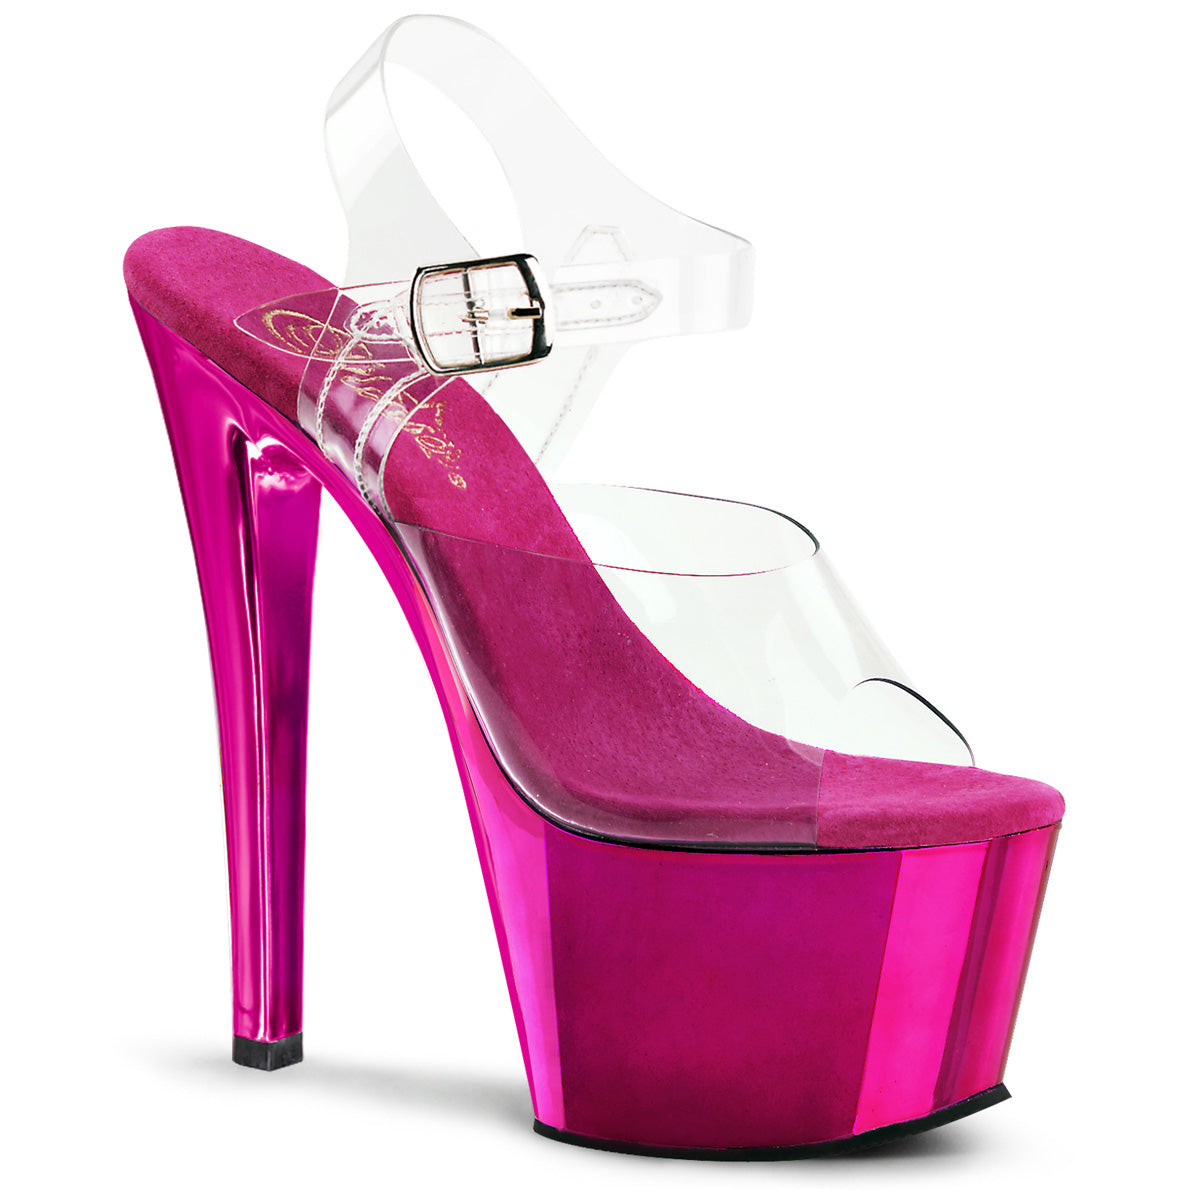 SKY-308 Pleaser Shoes